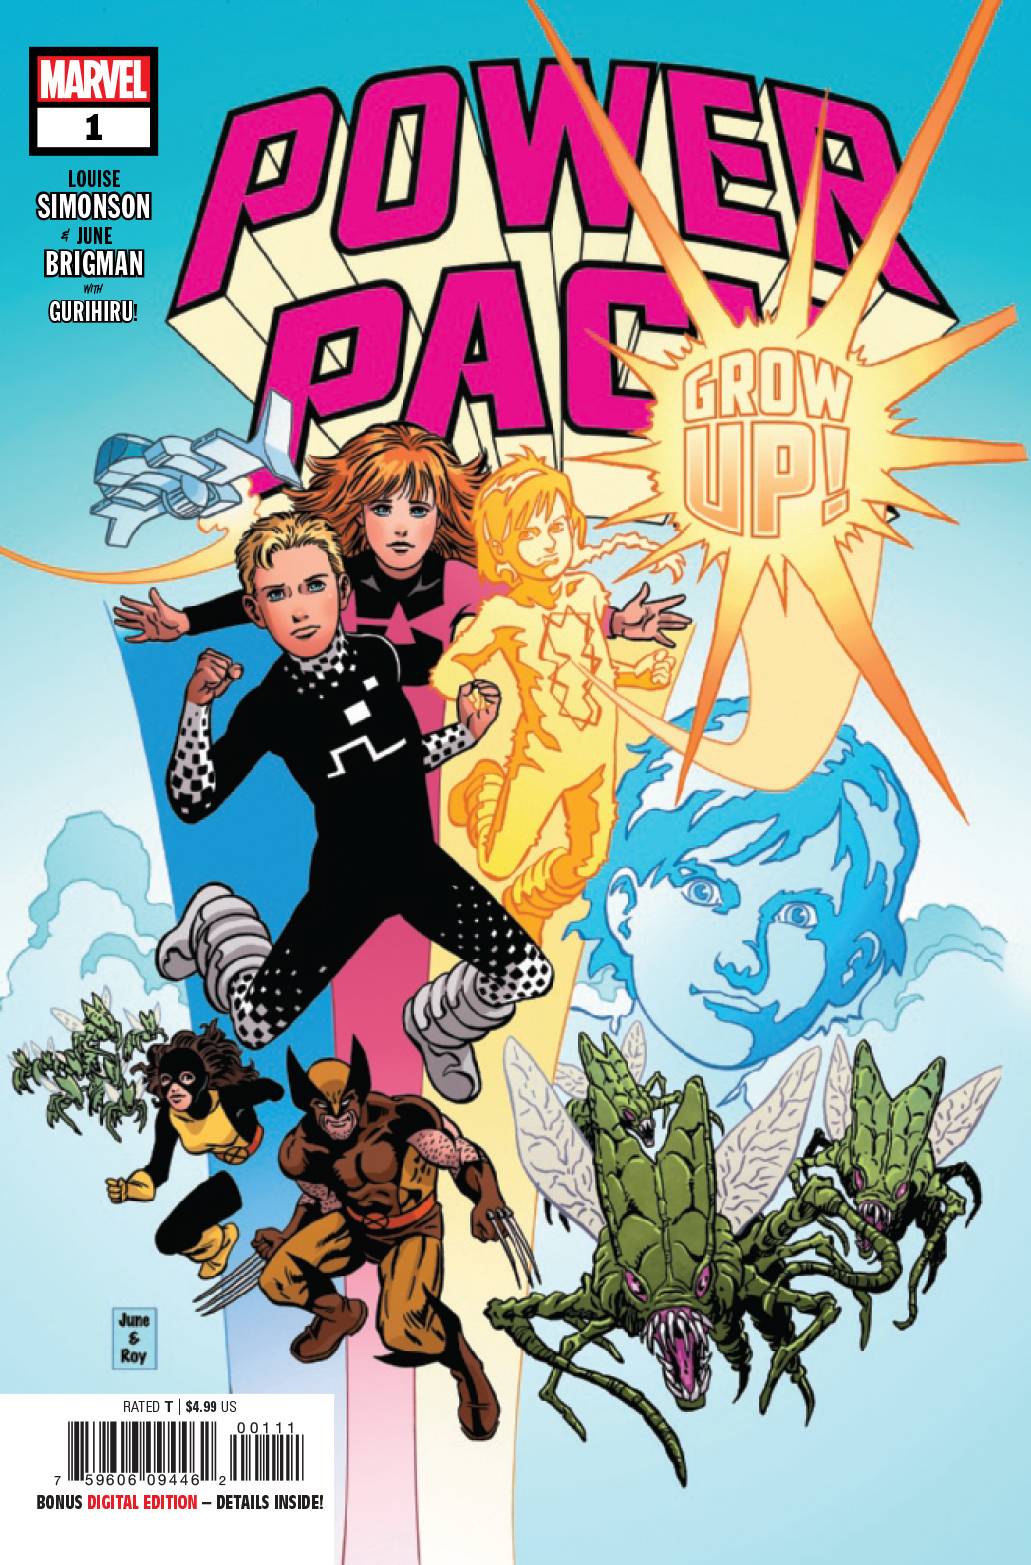 POWER PACK GROW UP #1